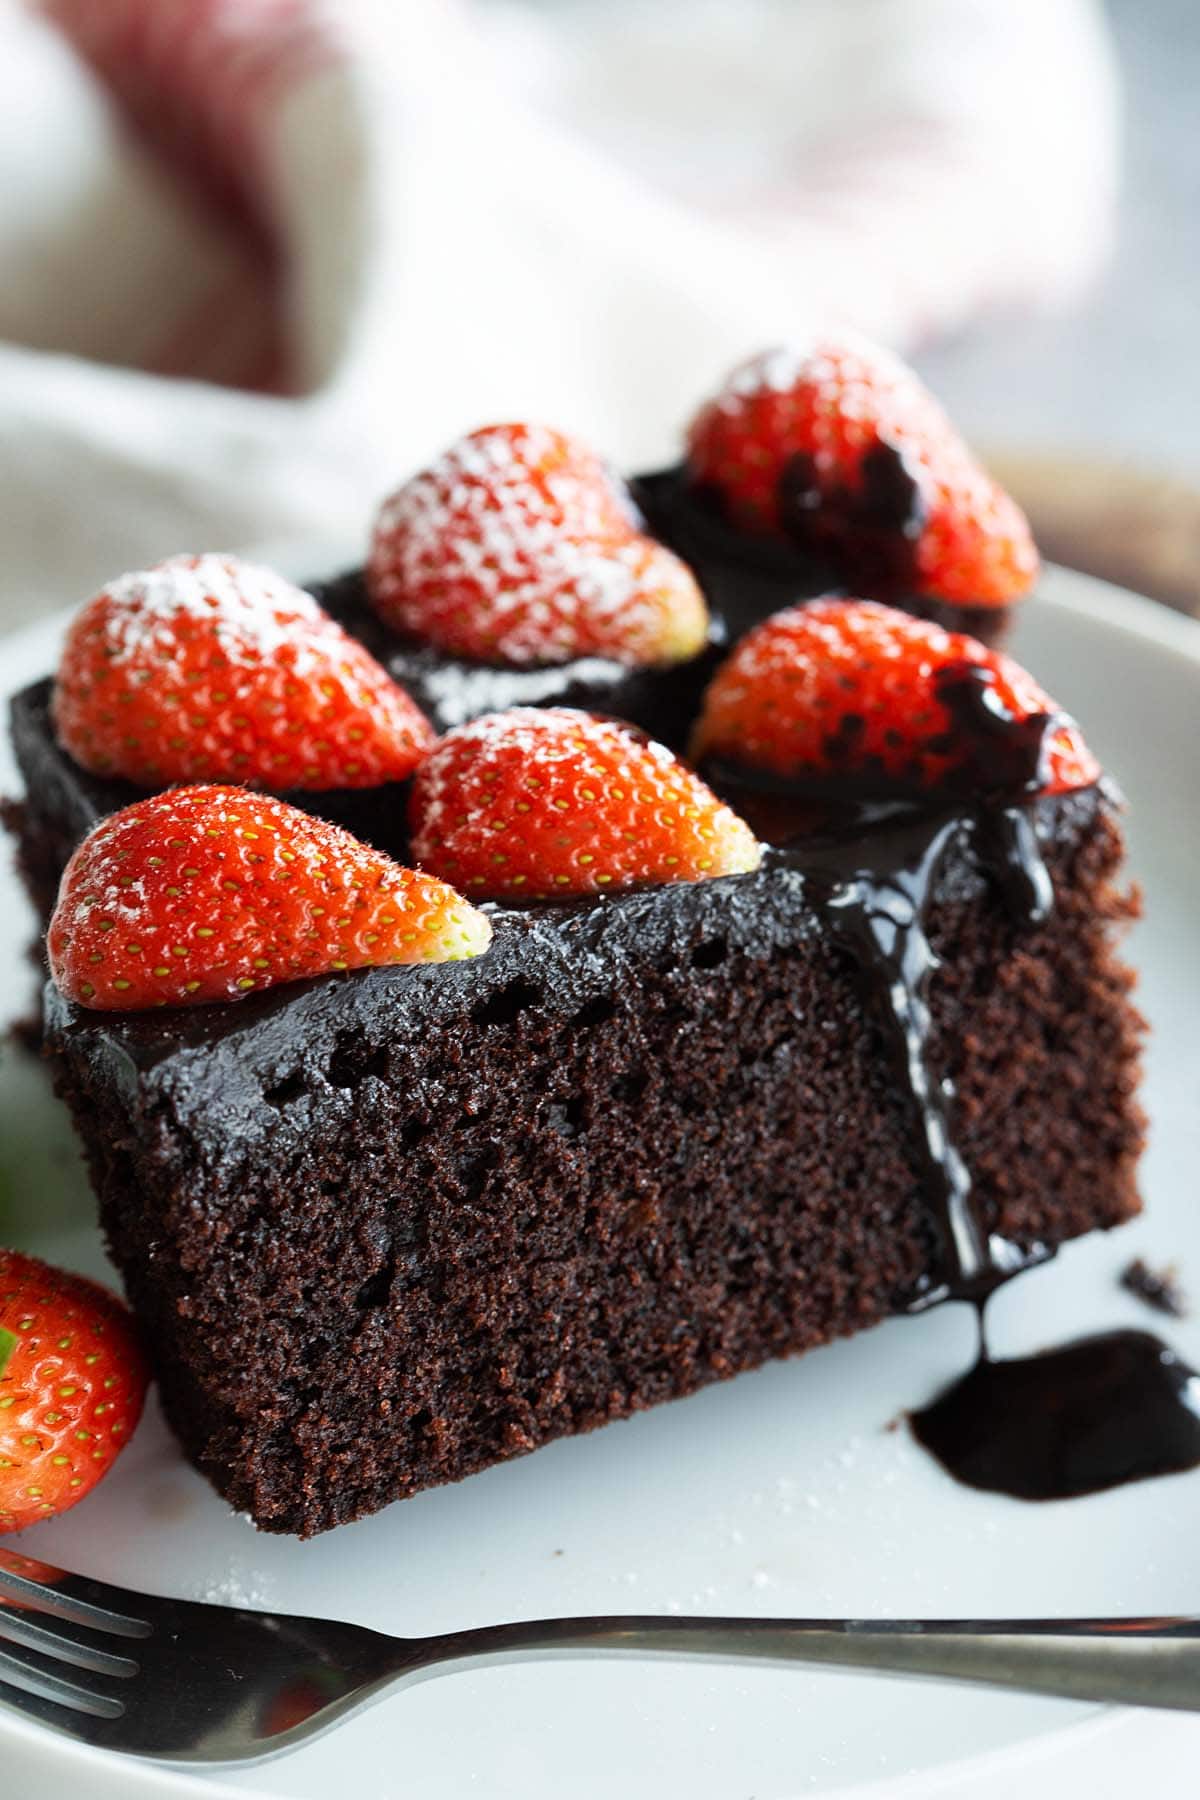 Chocolate cake that is homemade, simple, moist and topped with strawberries.